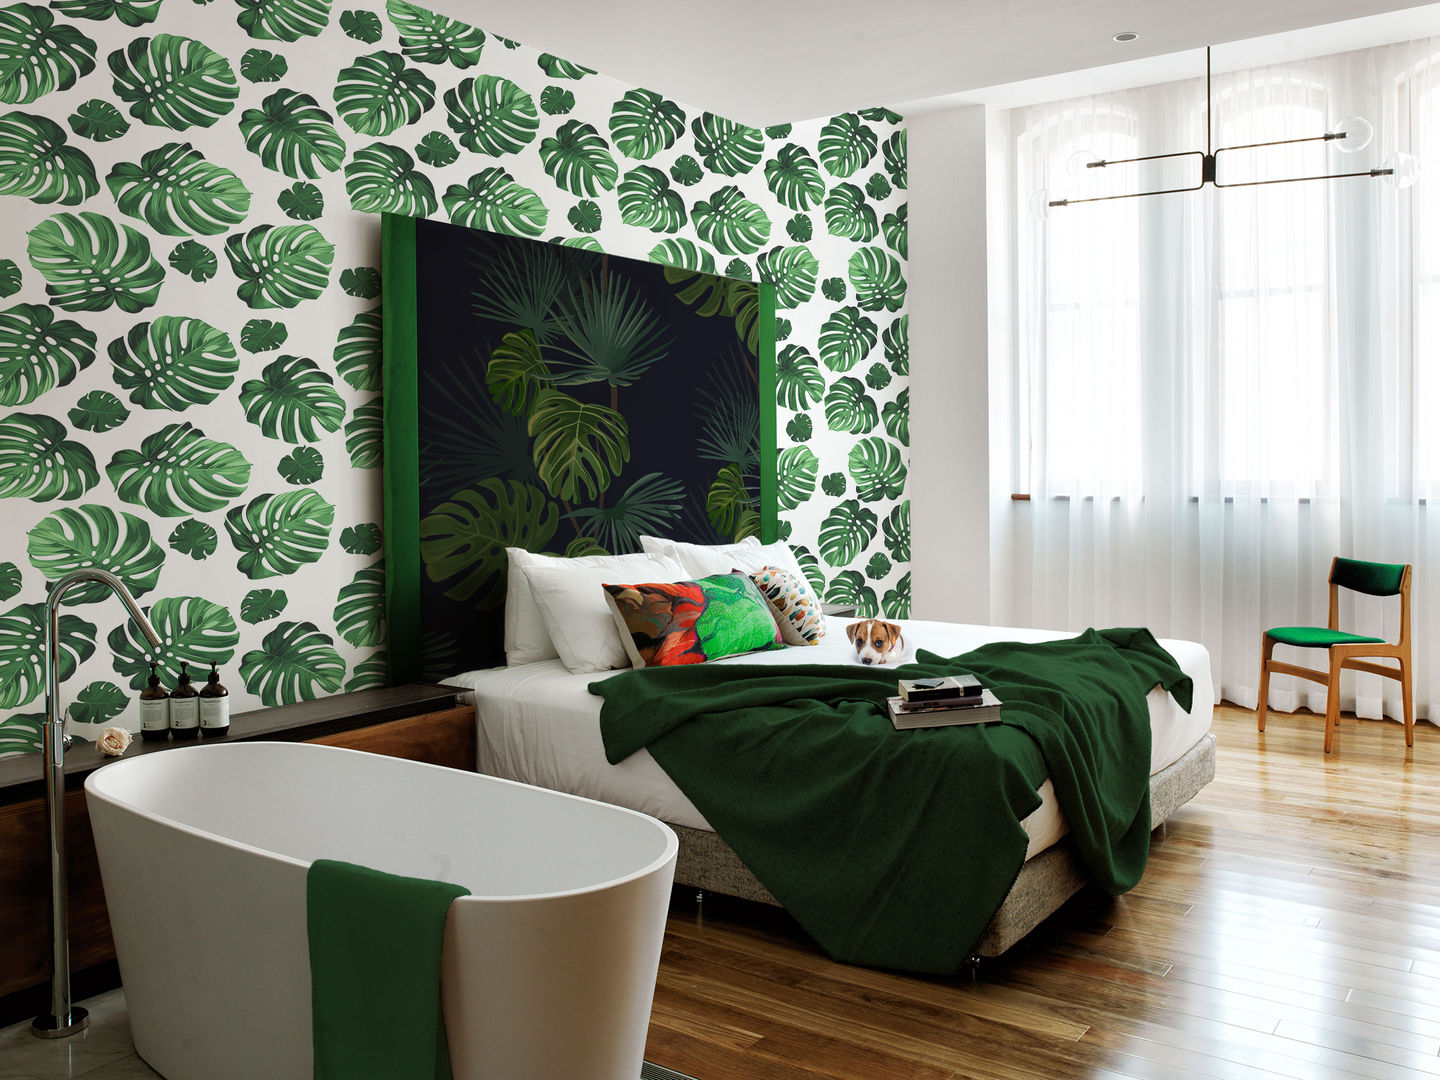 UNDER THE PALM LEAF Pixers Tropical style bedroom Accessories & decoration